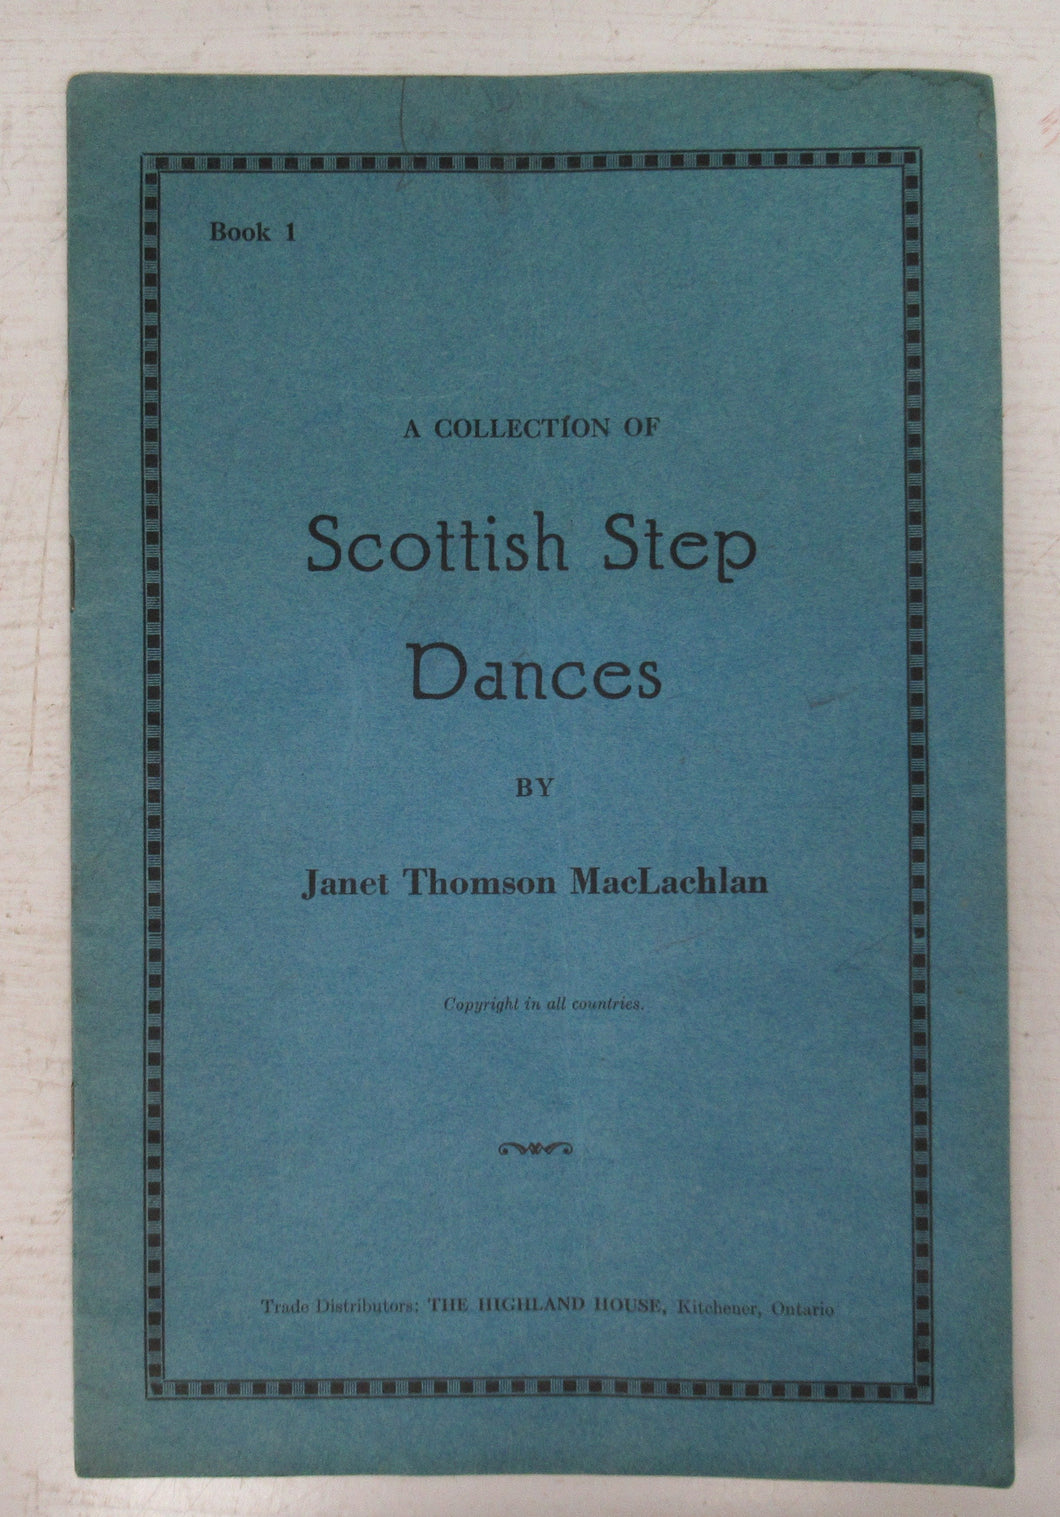 A Collection of Scottish Step Dances